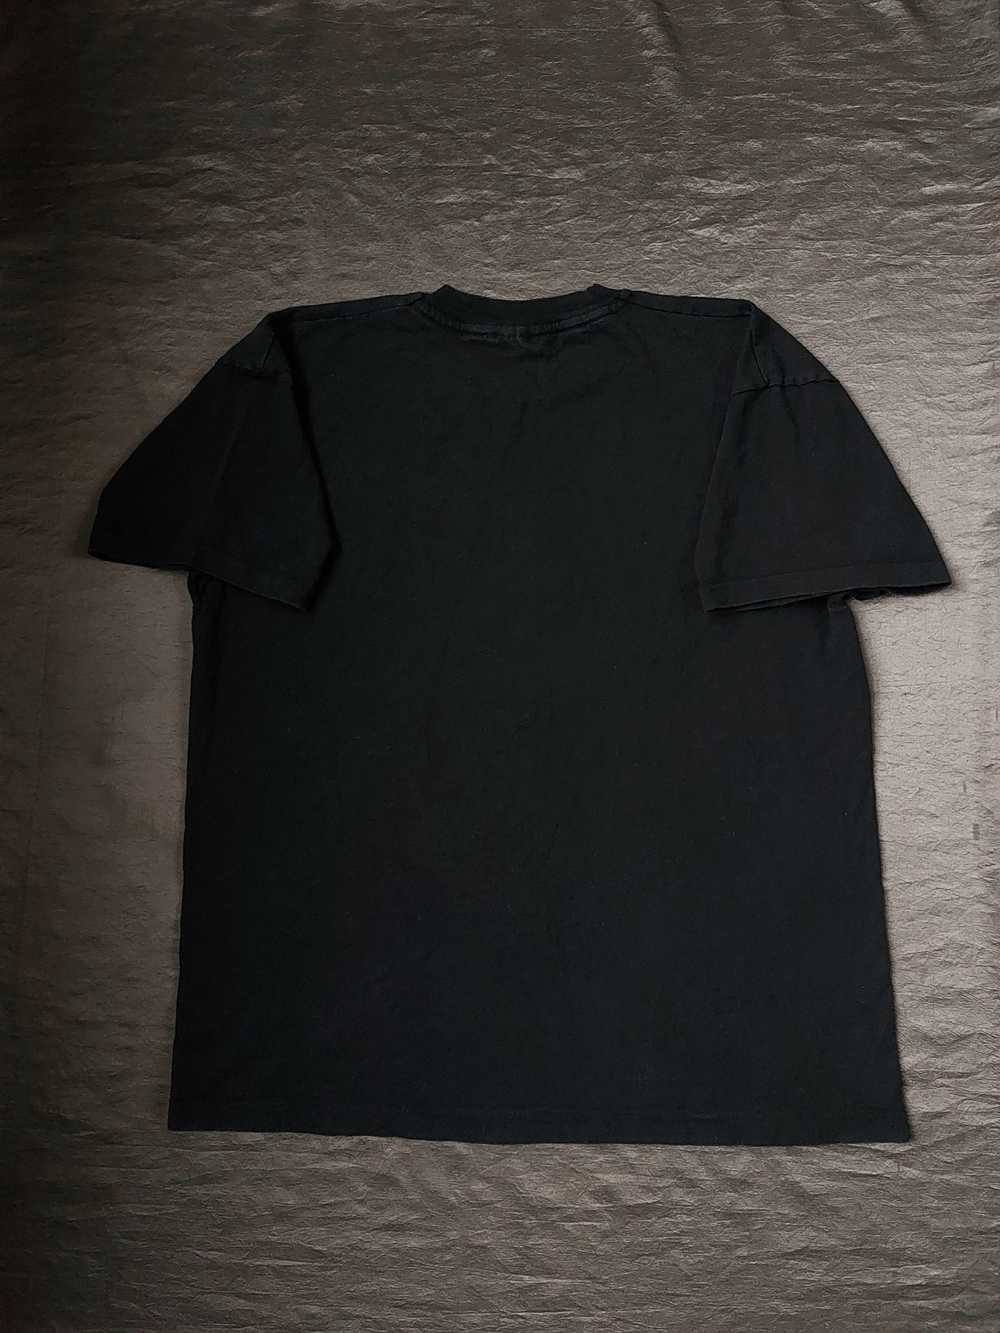 Band Tees × Made In Usa × Movie Rare T-shirt one … - image 4